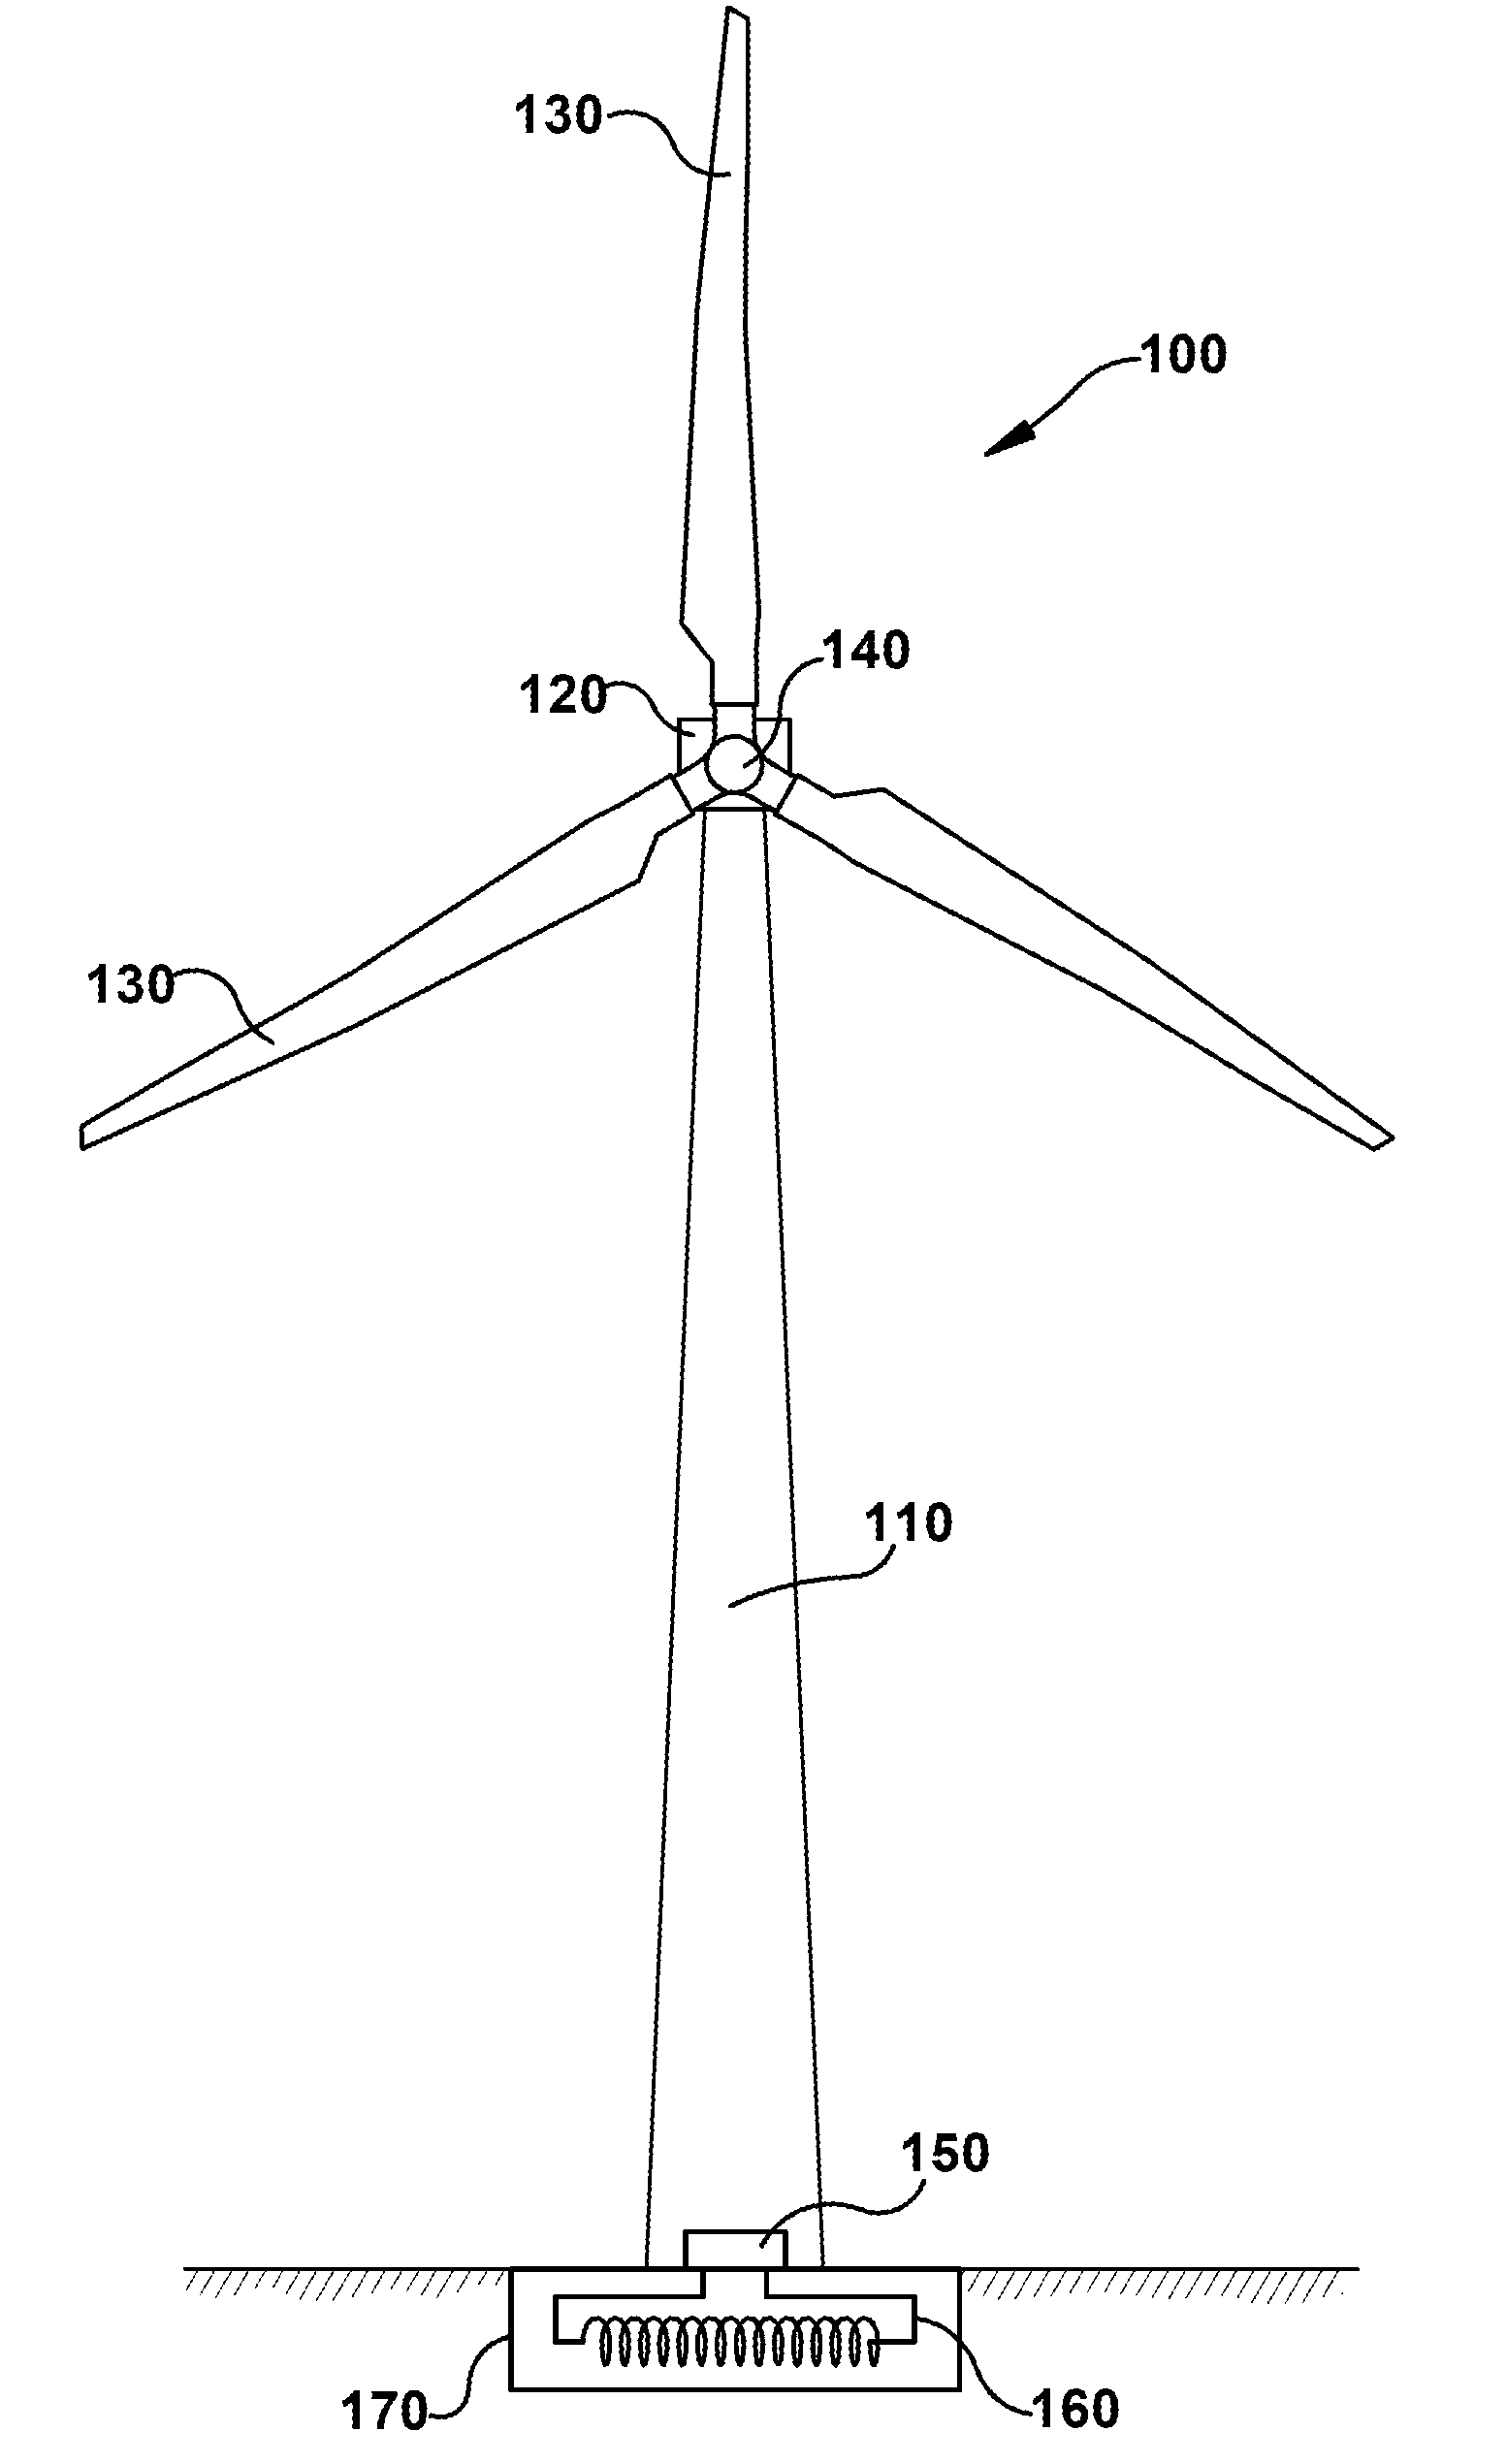 Wind turbine geothermal heating and cooling system